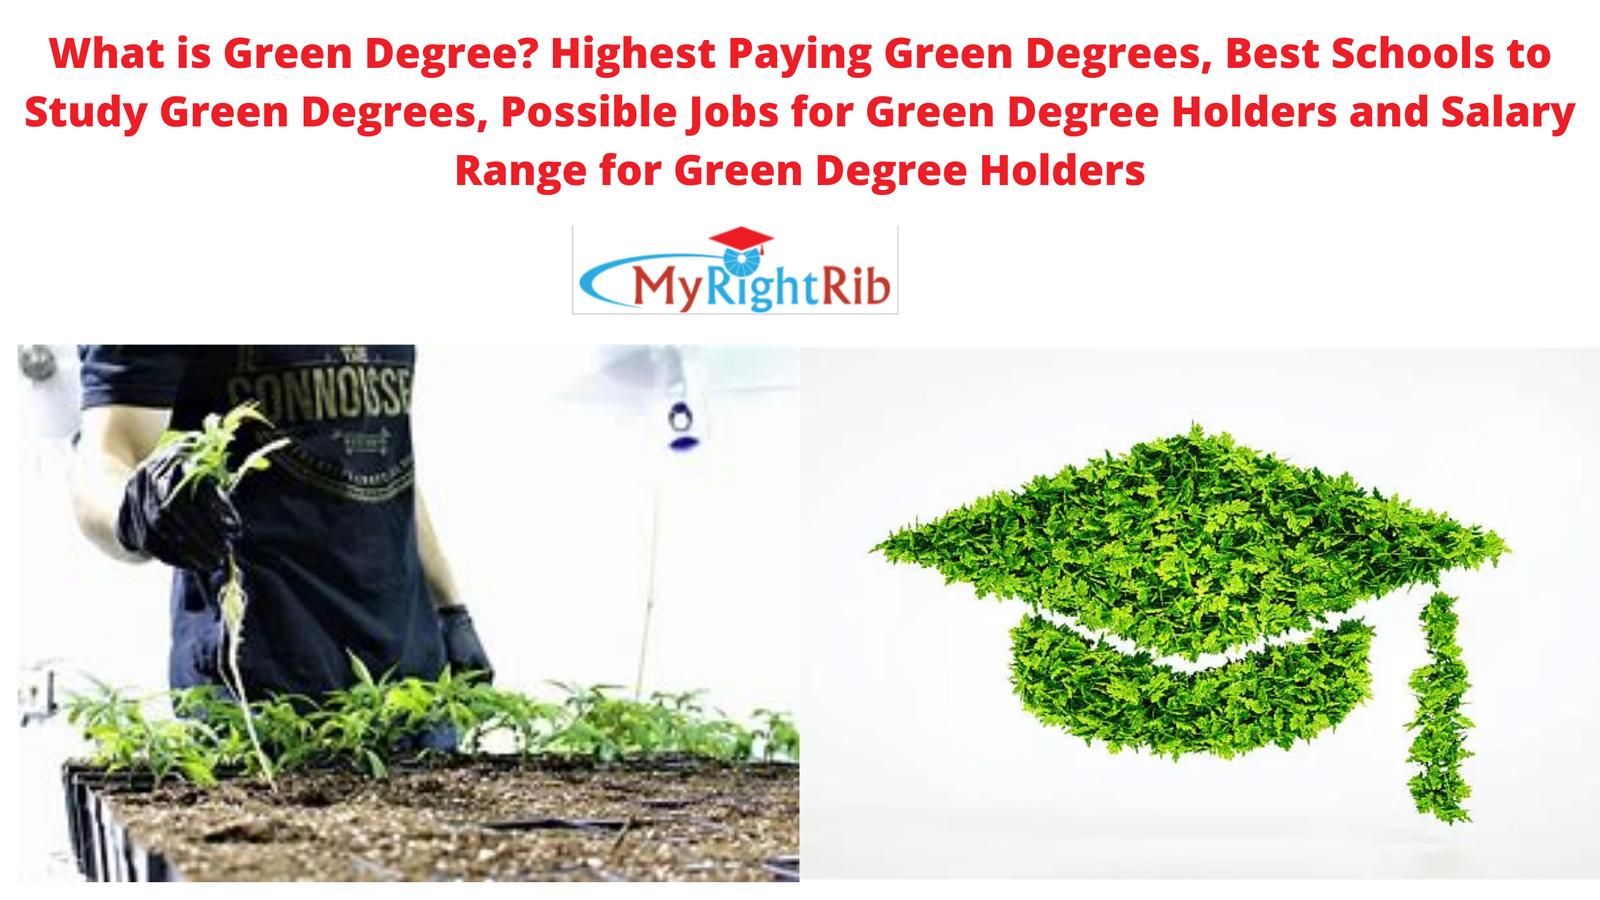 What is Green Degree and Possible Jobs for Green Degree Holders